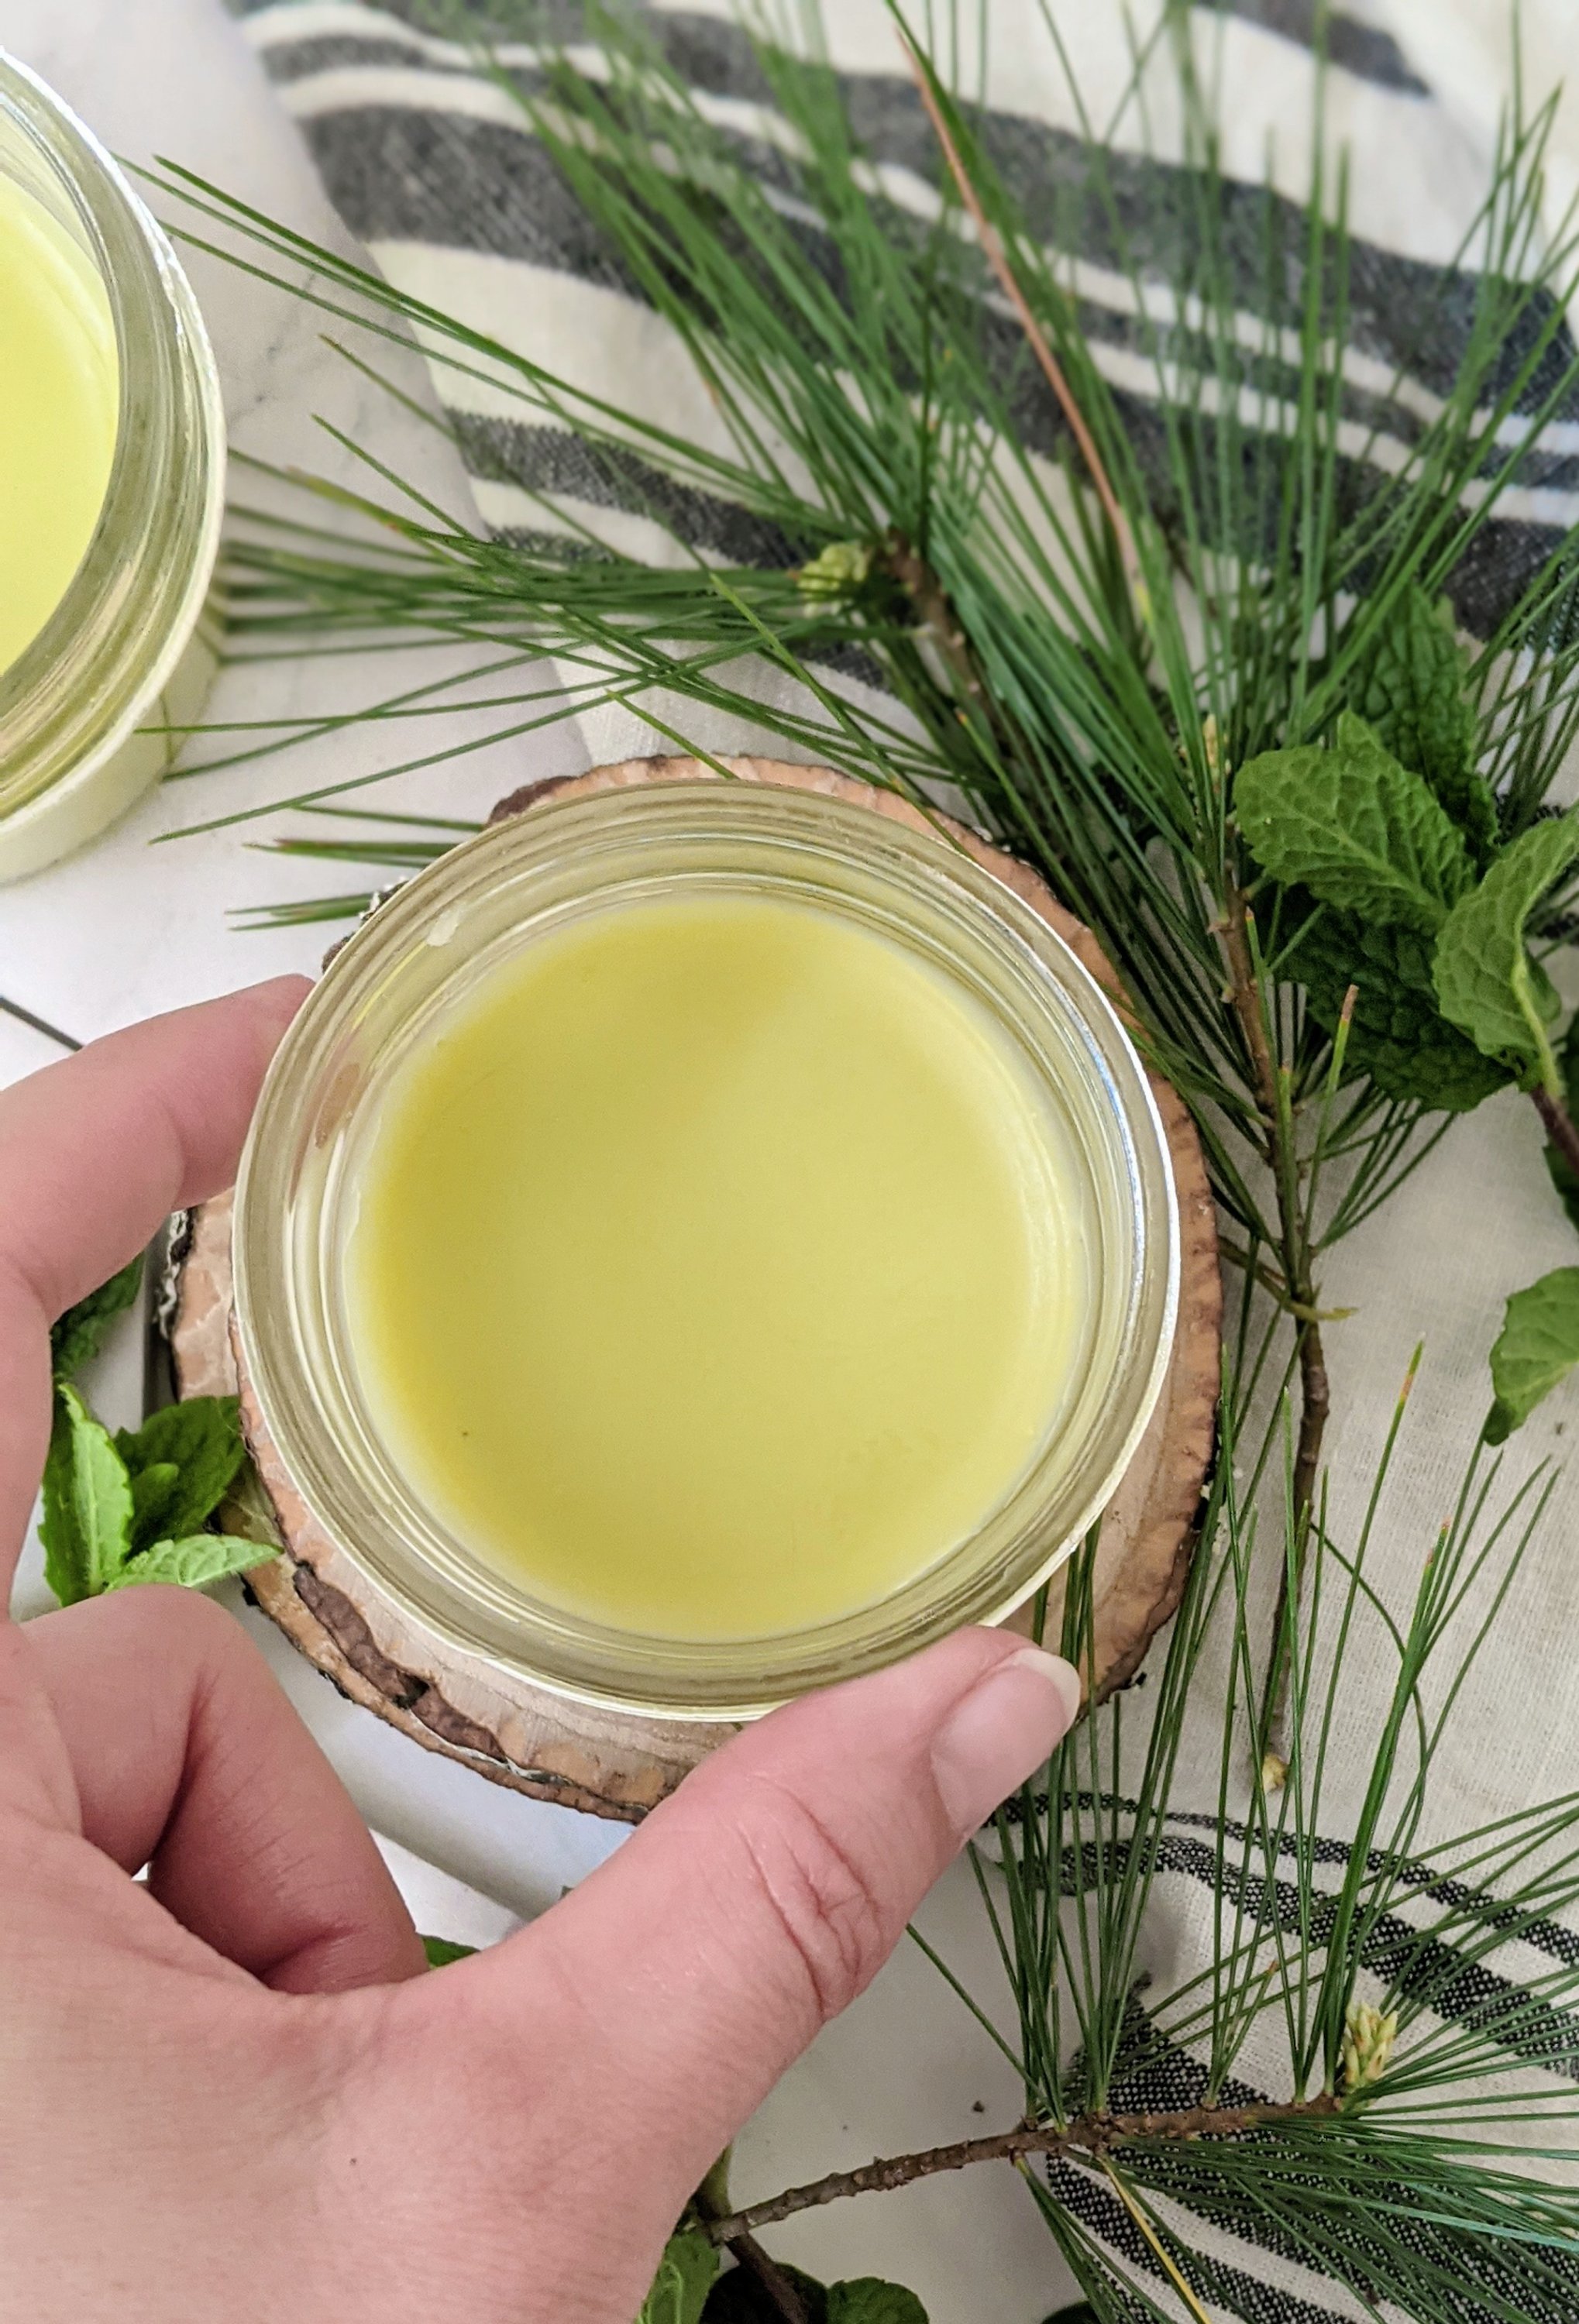 essential oil balm for headaches aromatherapy for head aches peppermint oil and pine oil diy infused oil with natural ingredients for headache balm recipe